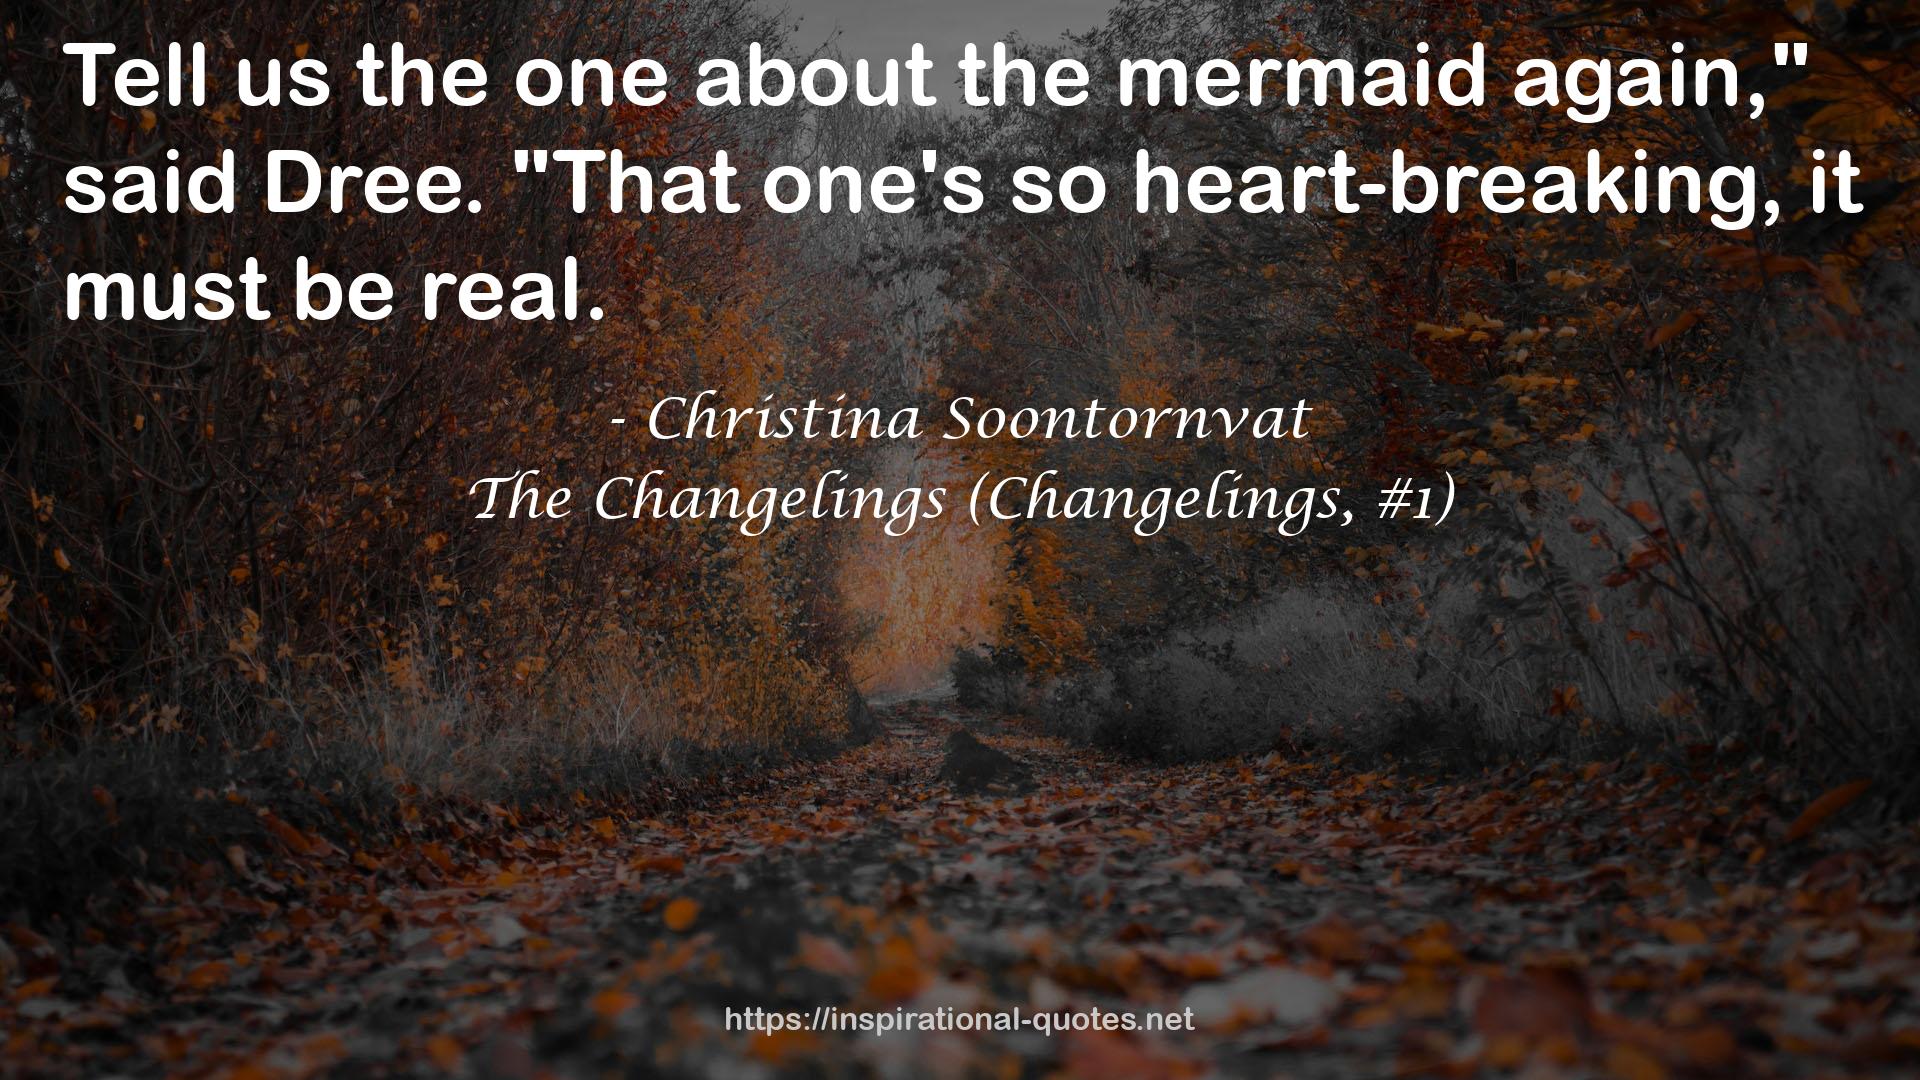 The Changelings (Changelings, #1) QUOTES